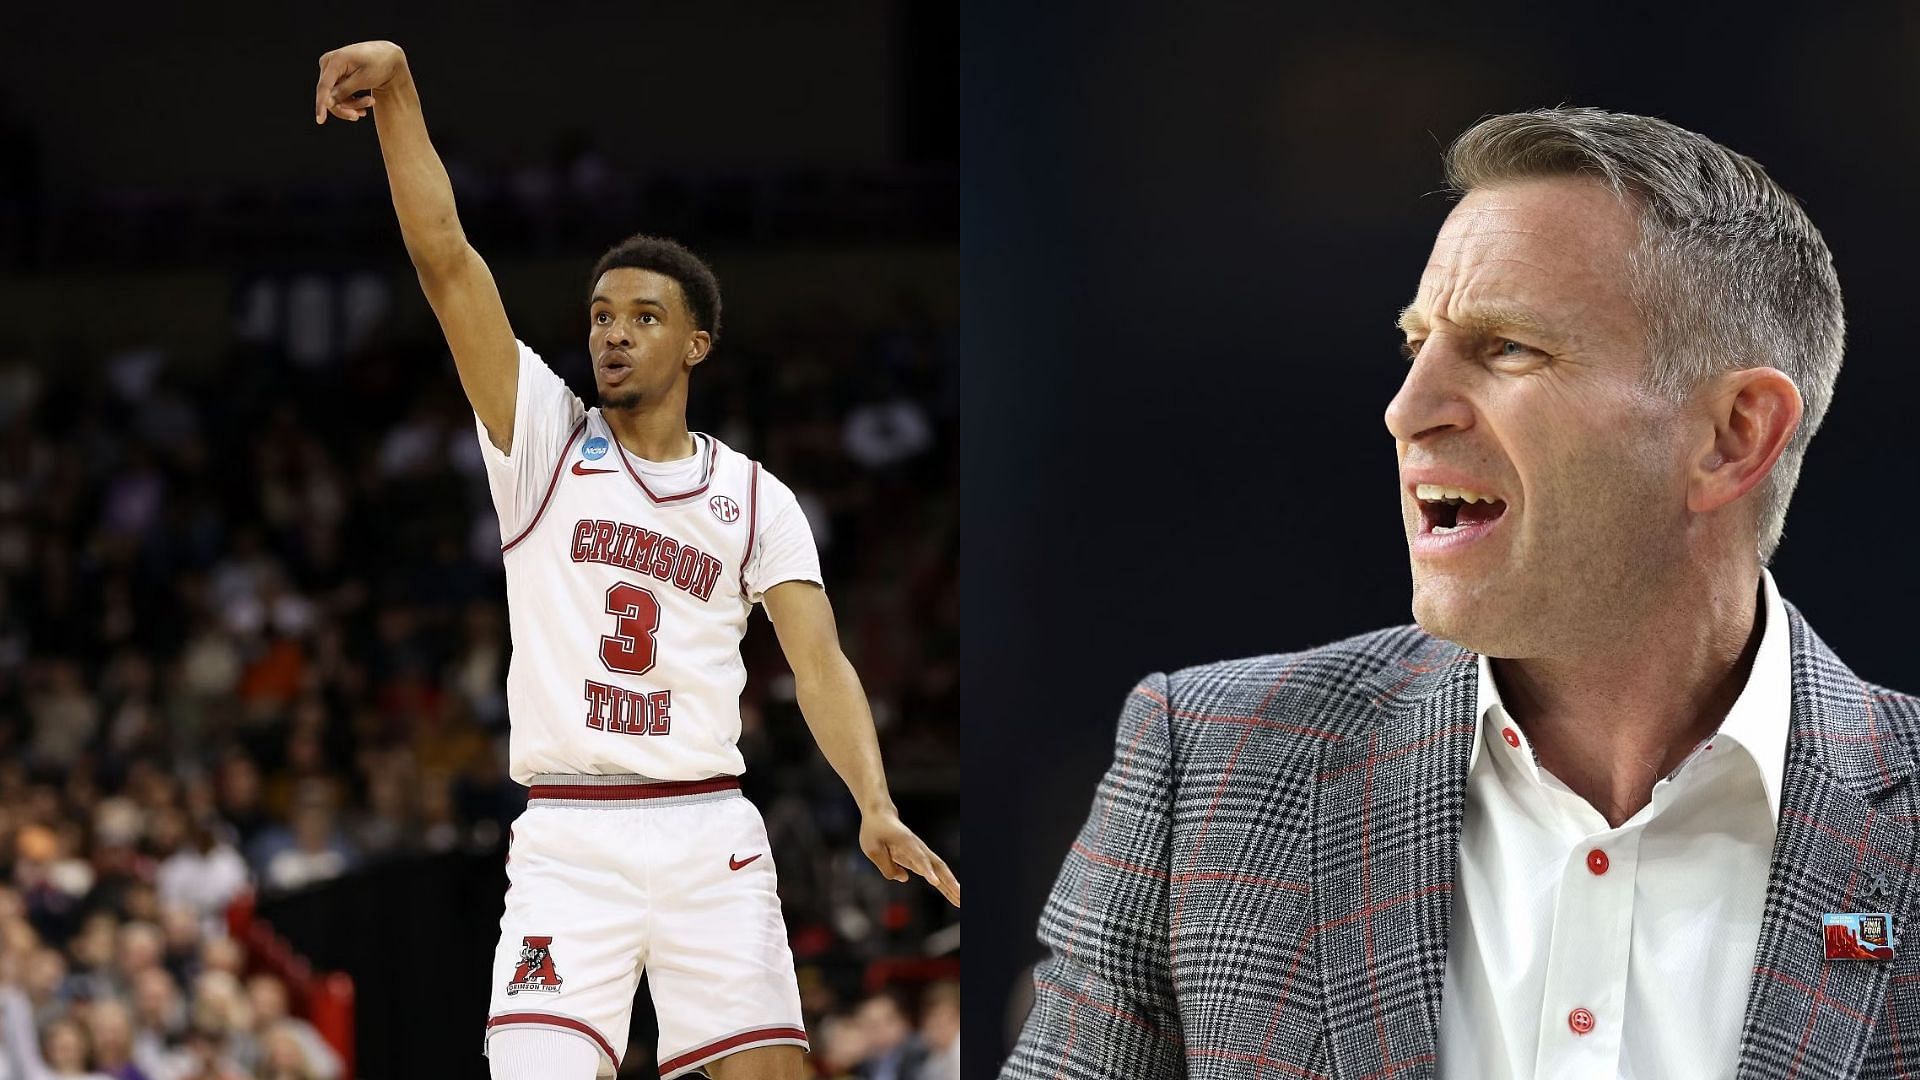 Rylan Griffen transferring out of Alabama and head coach Nate Oats